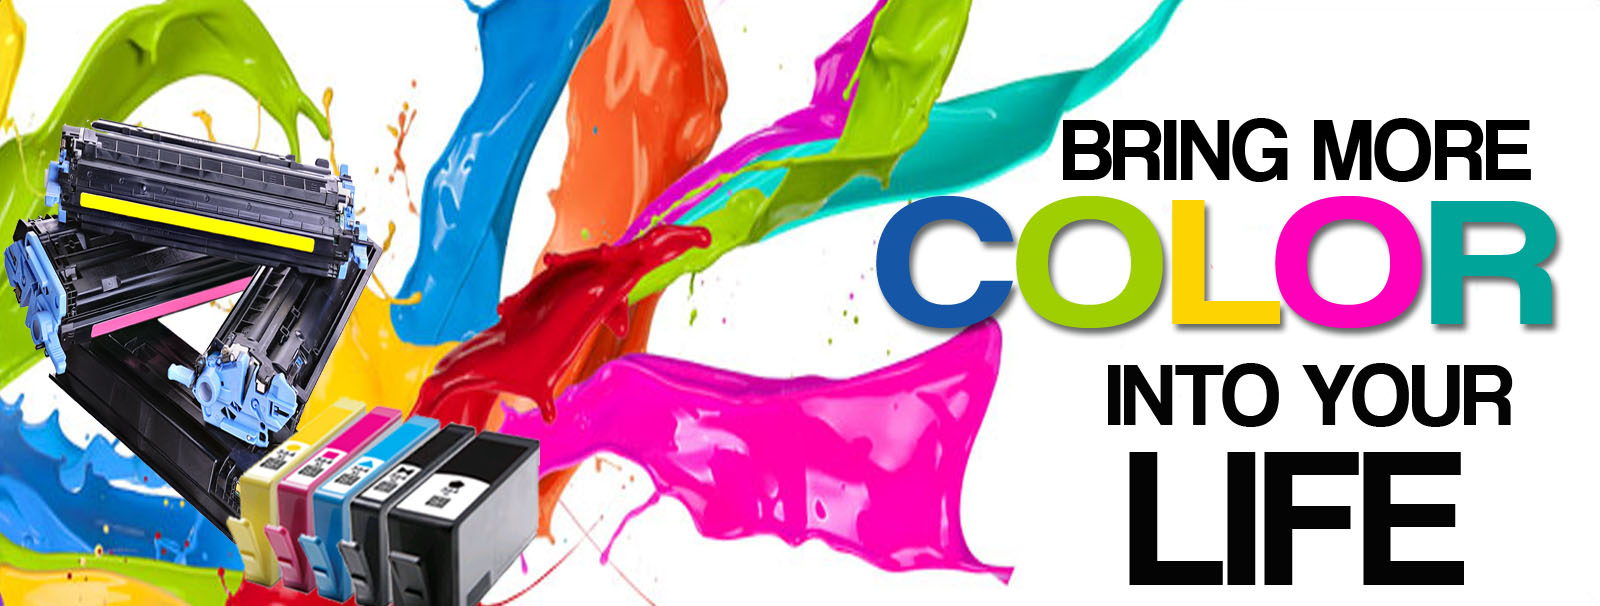 bring more color with ink and toner printer supplies from Main Street Does It